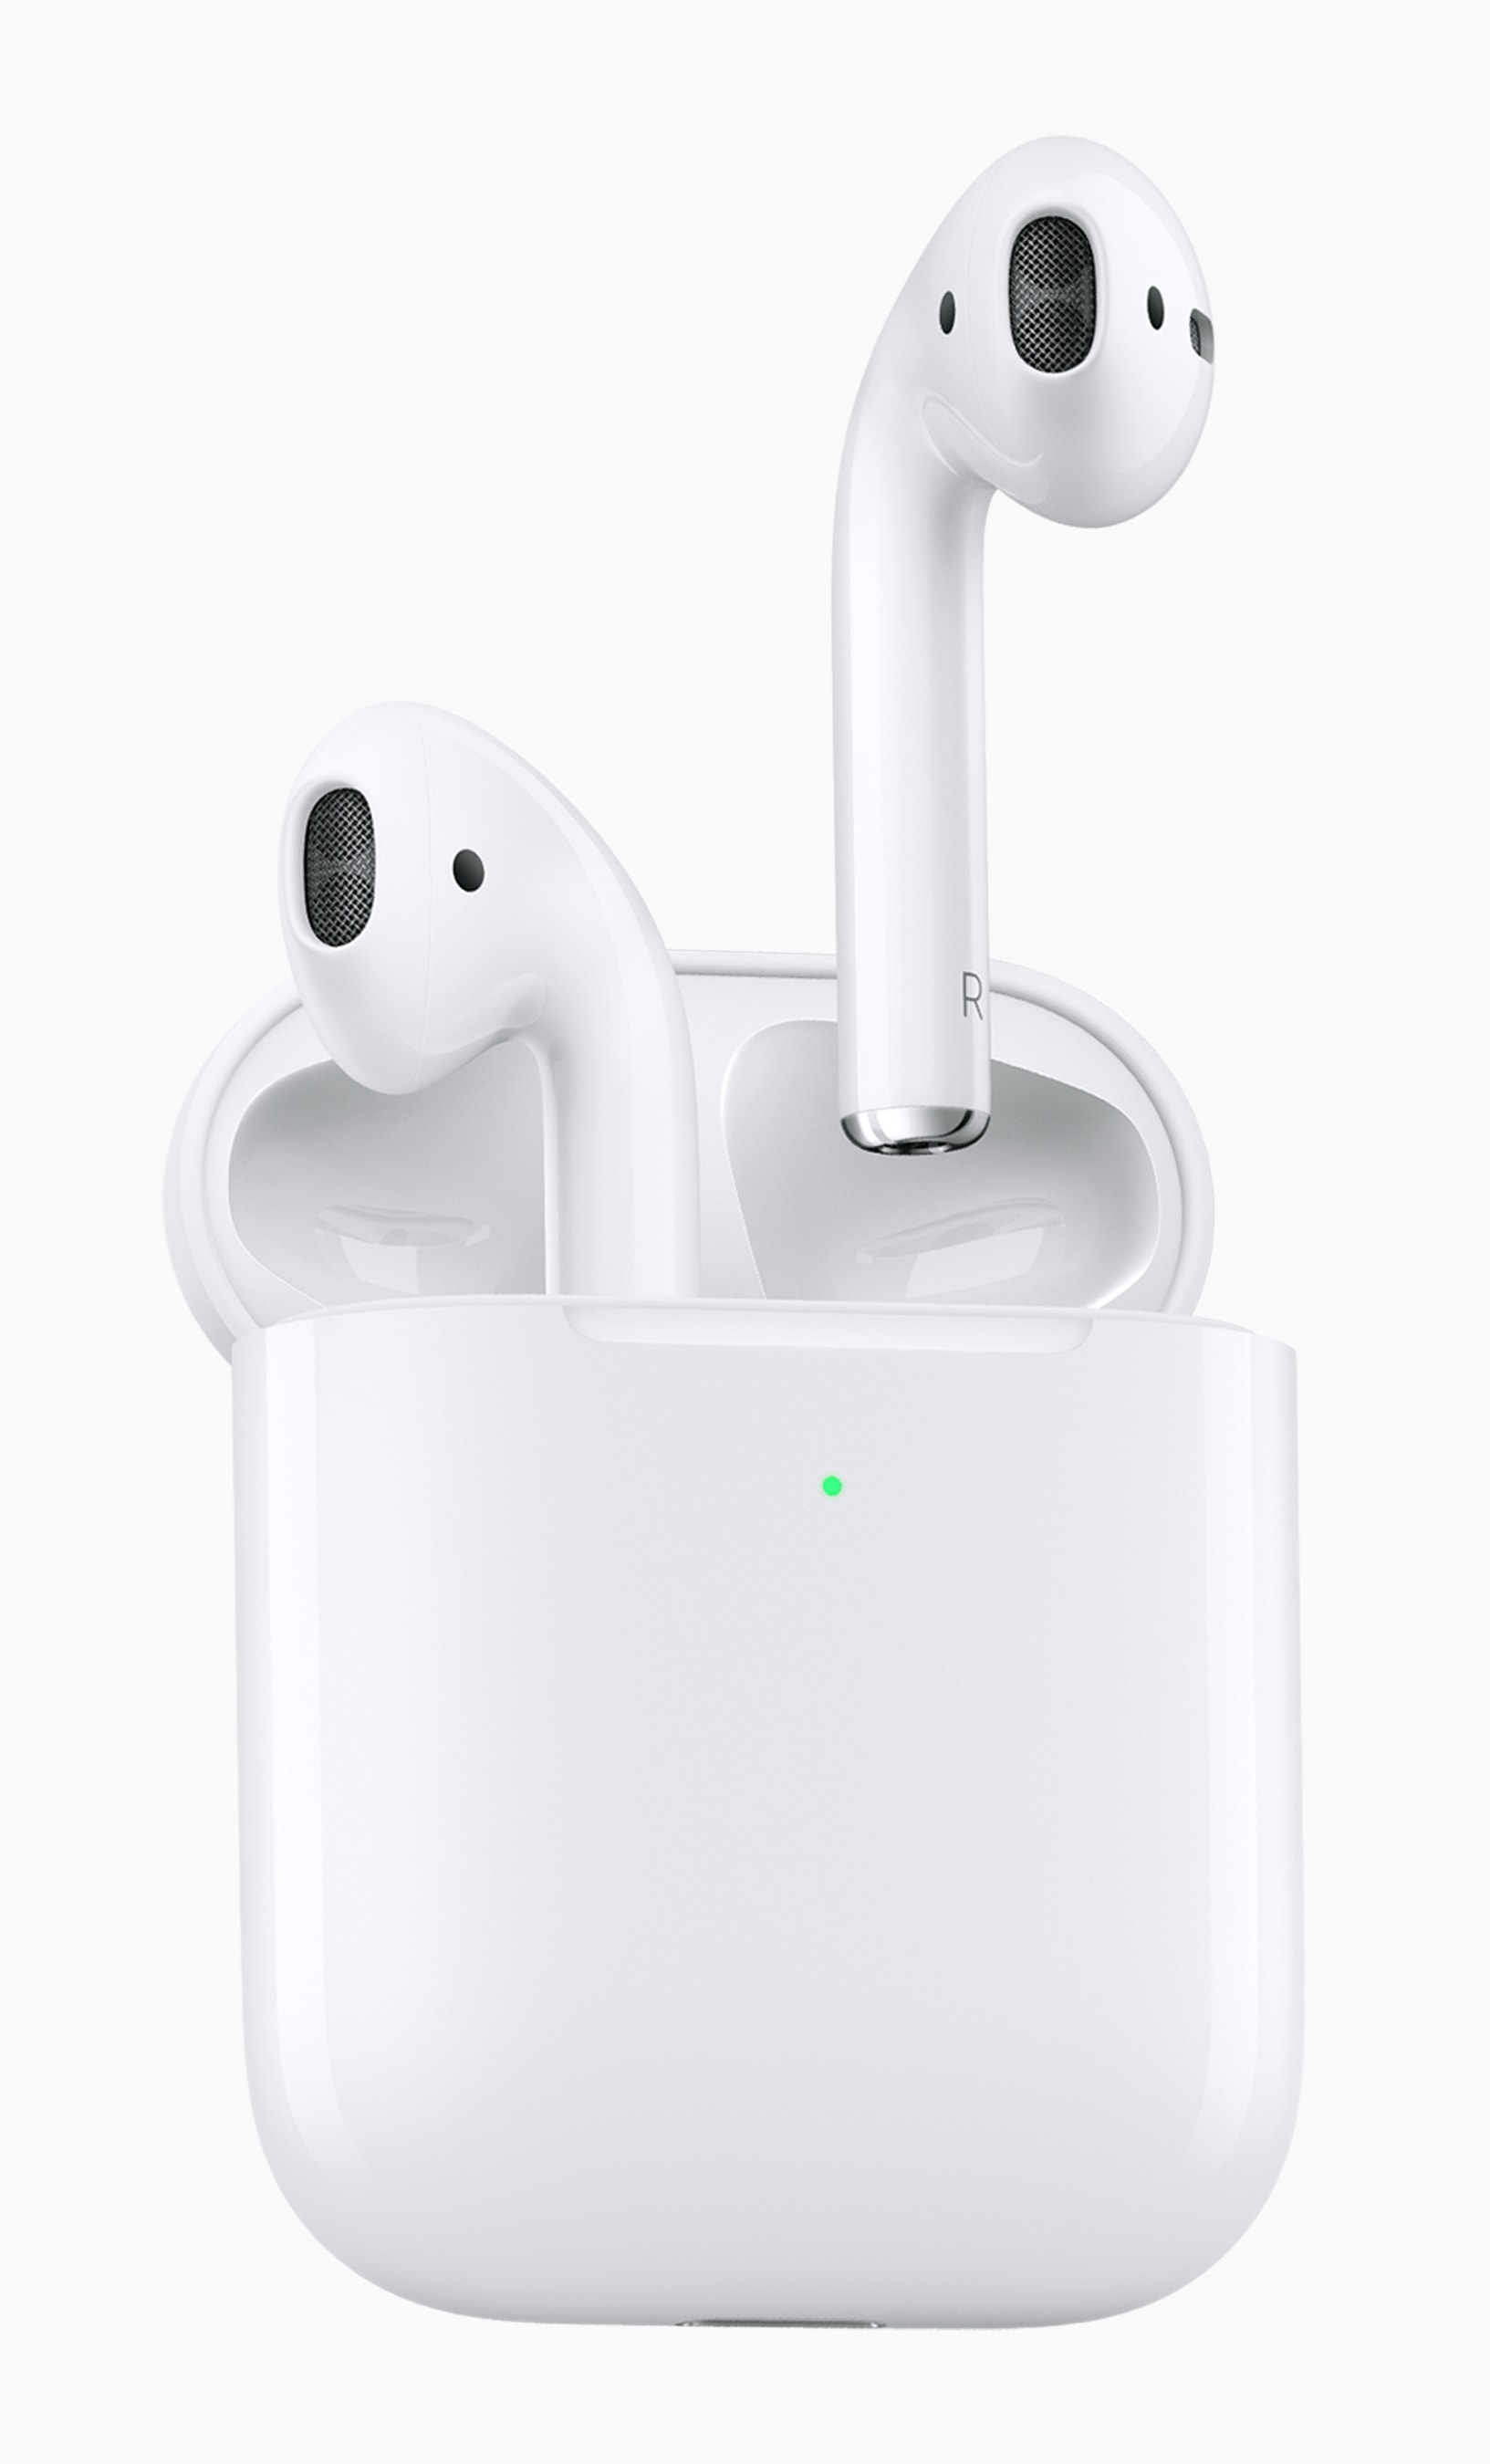 Second Generation AirPods